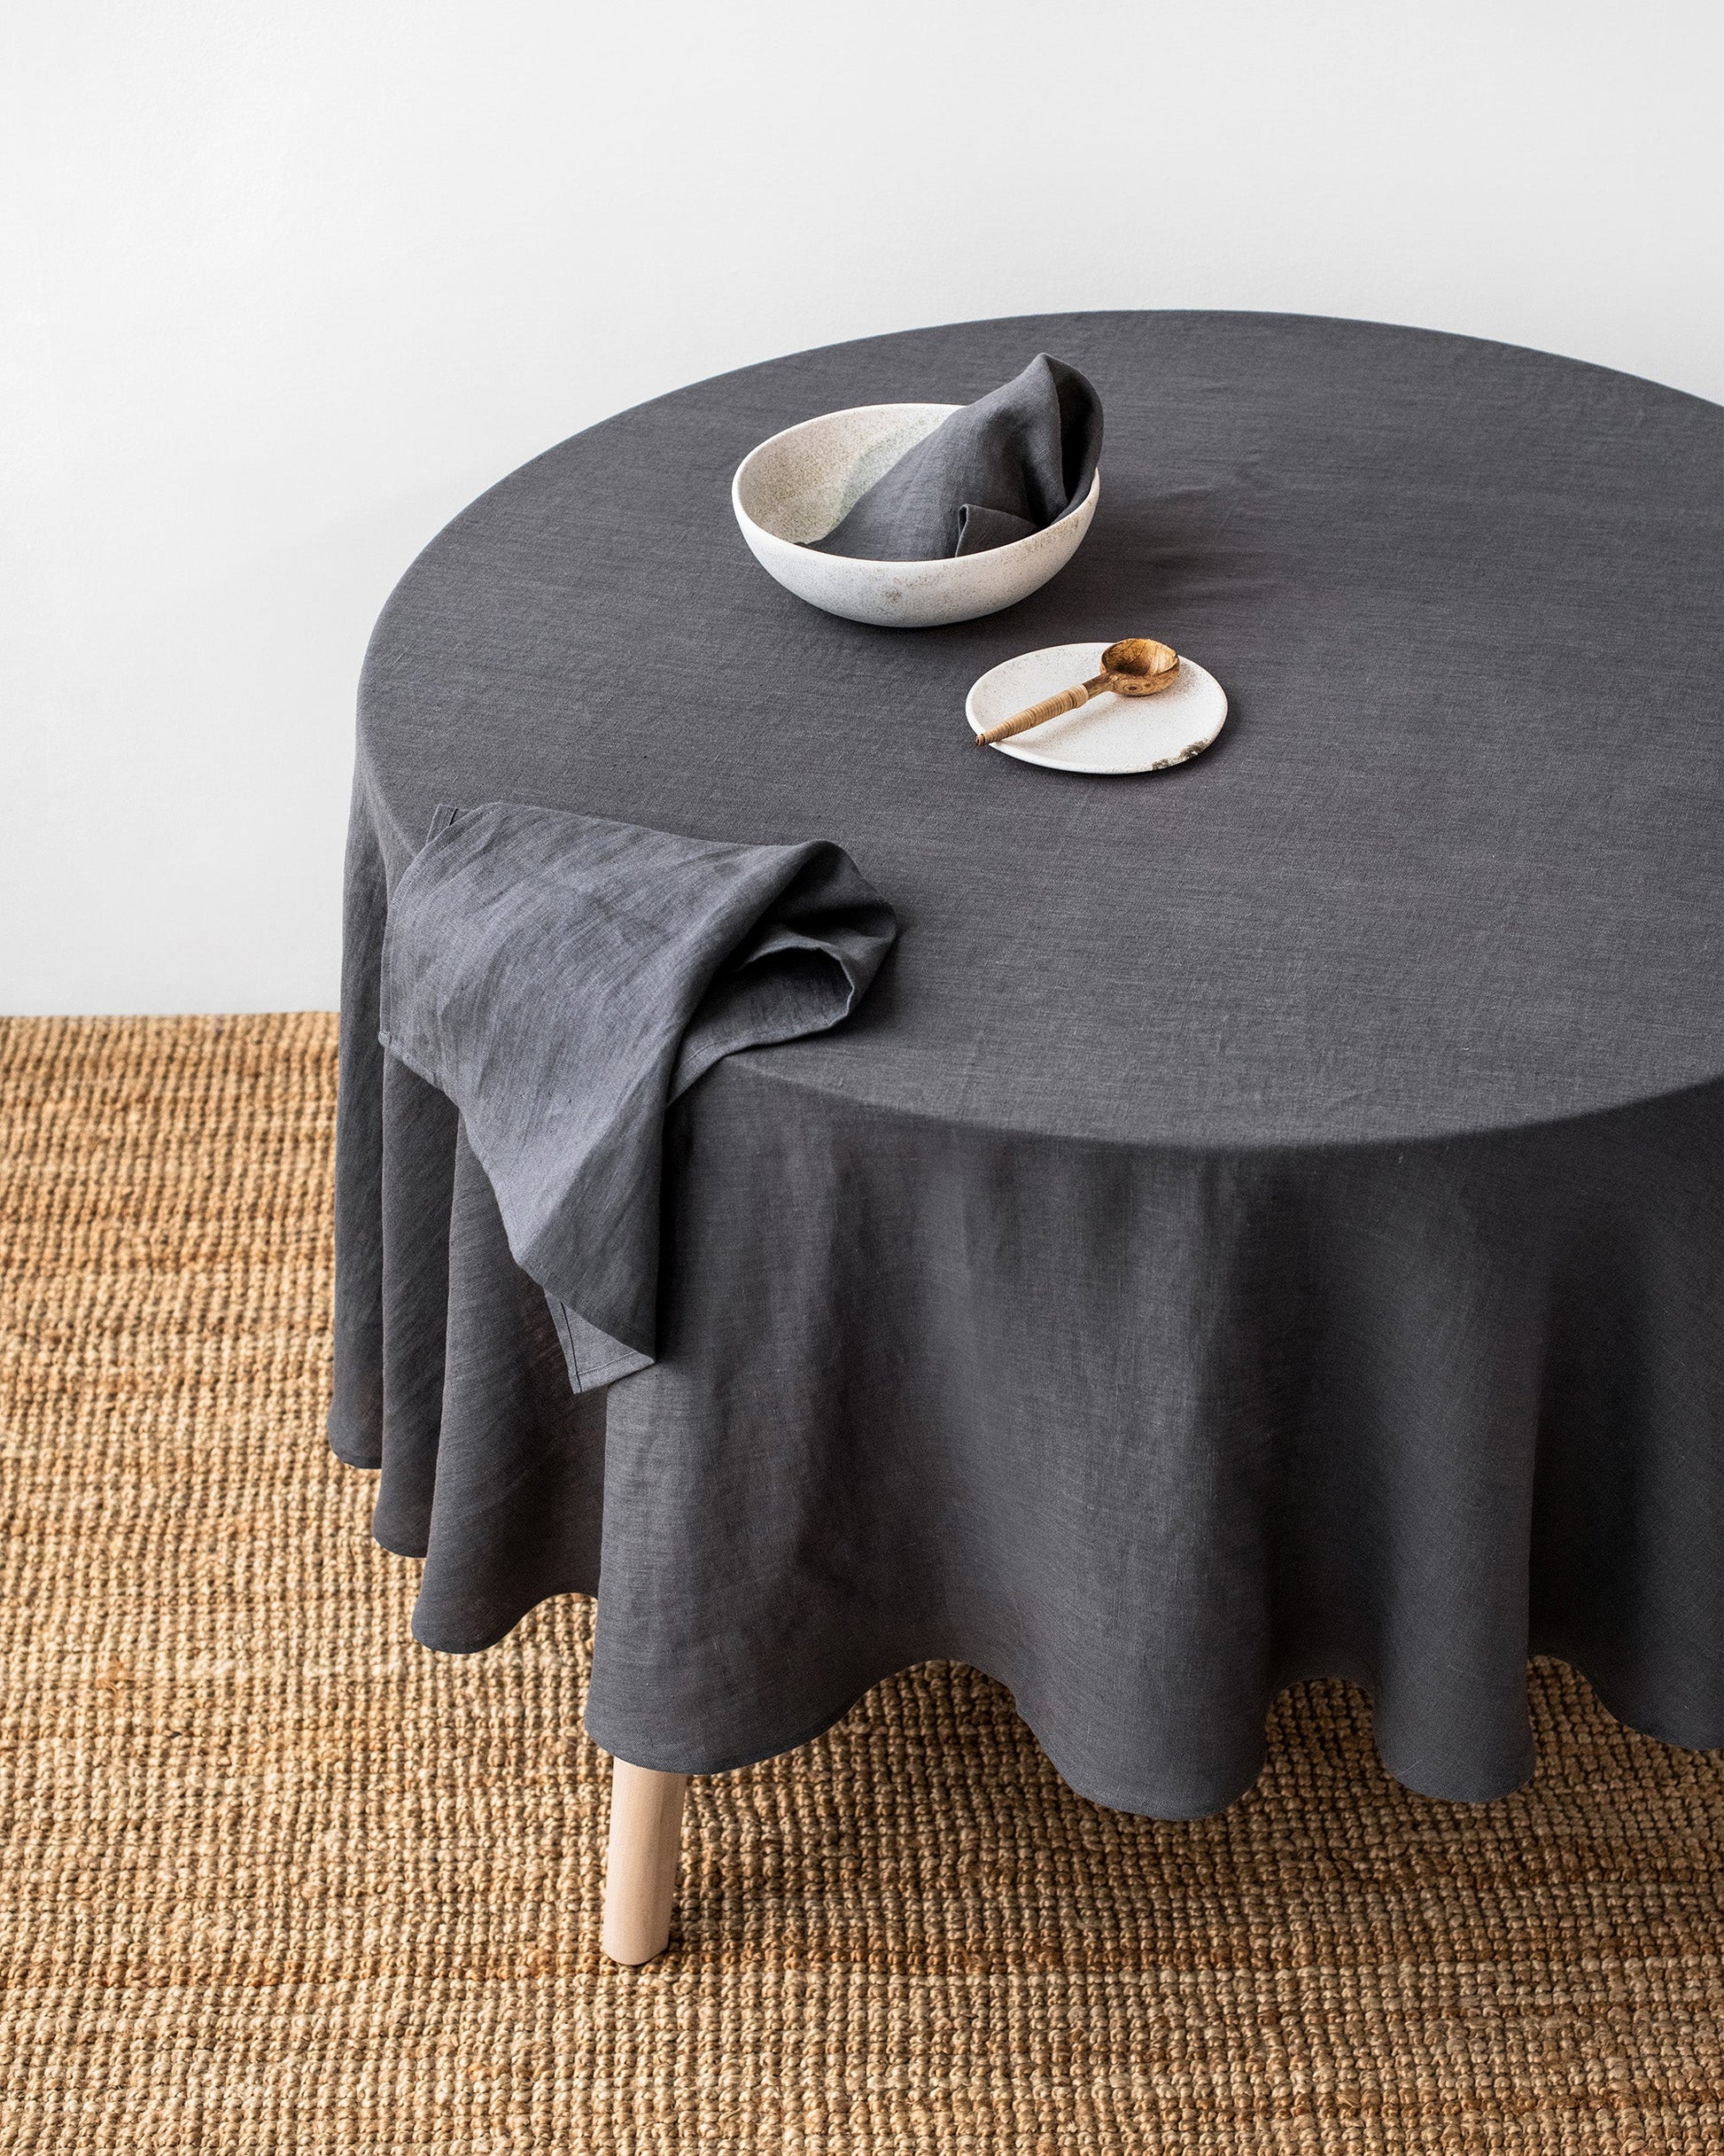 Custom size round linen tablecloth in Charcoal gray - MagicLinen